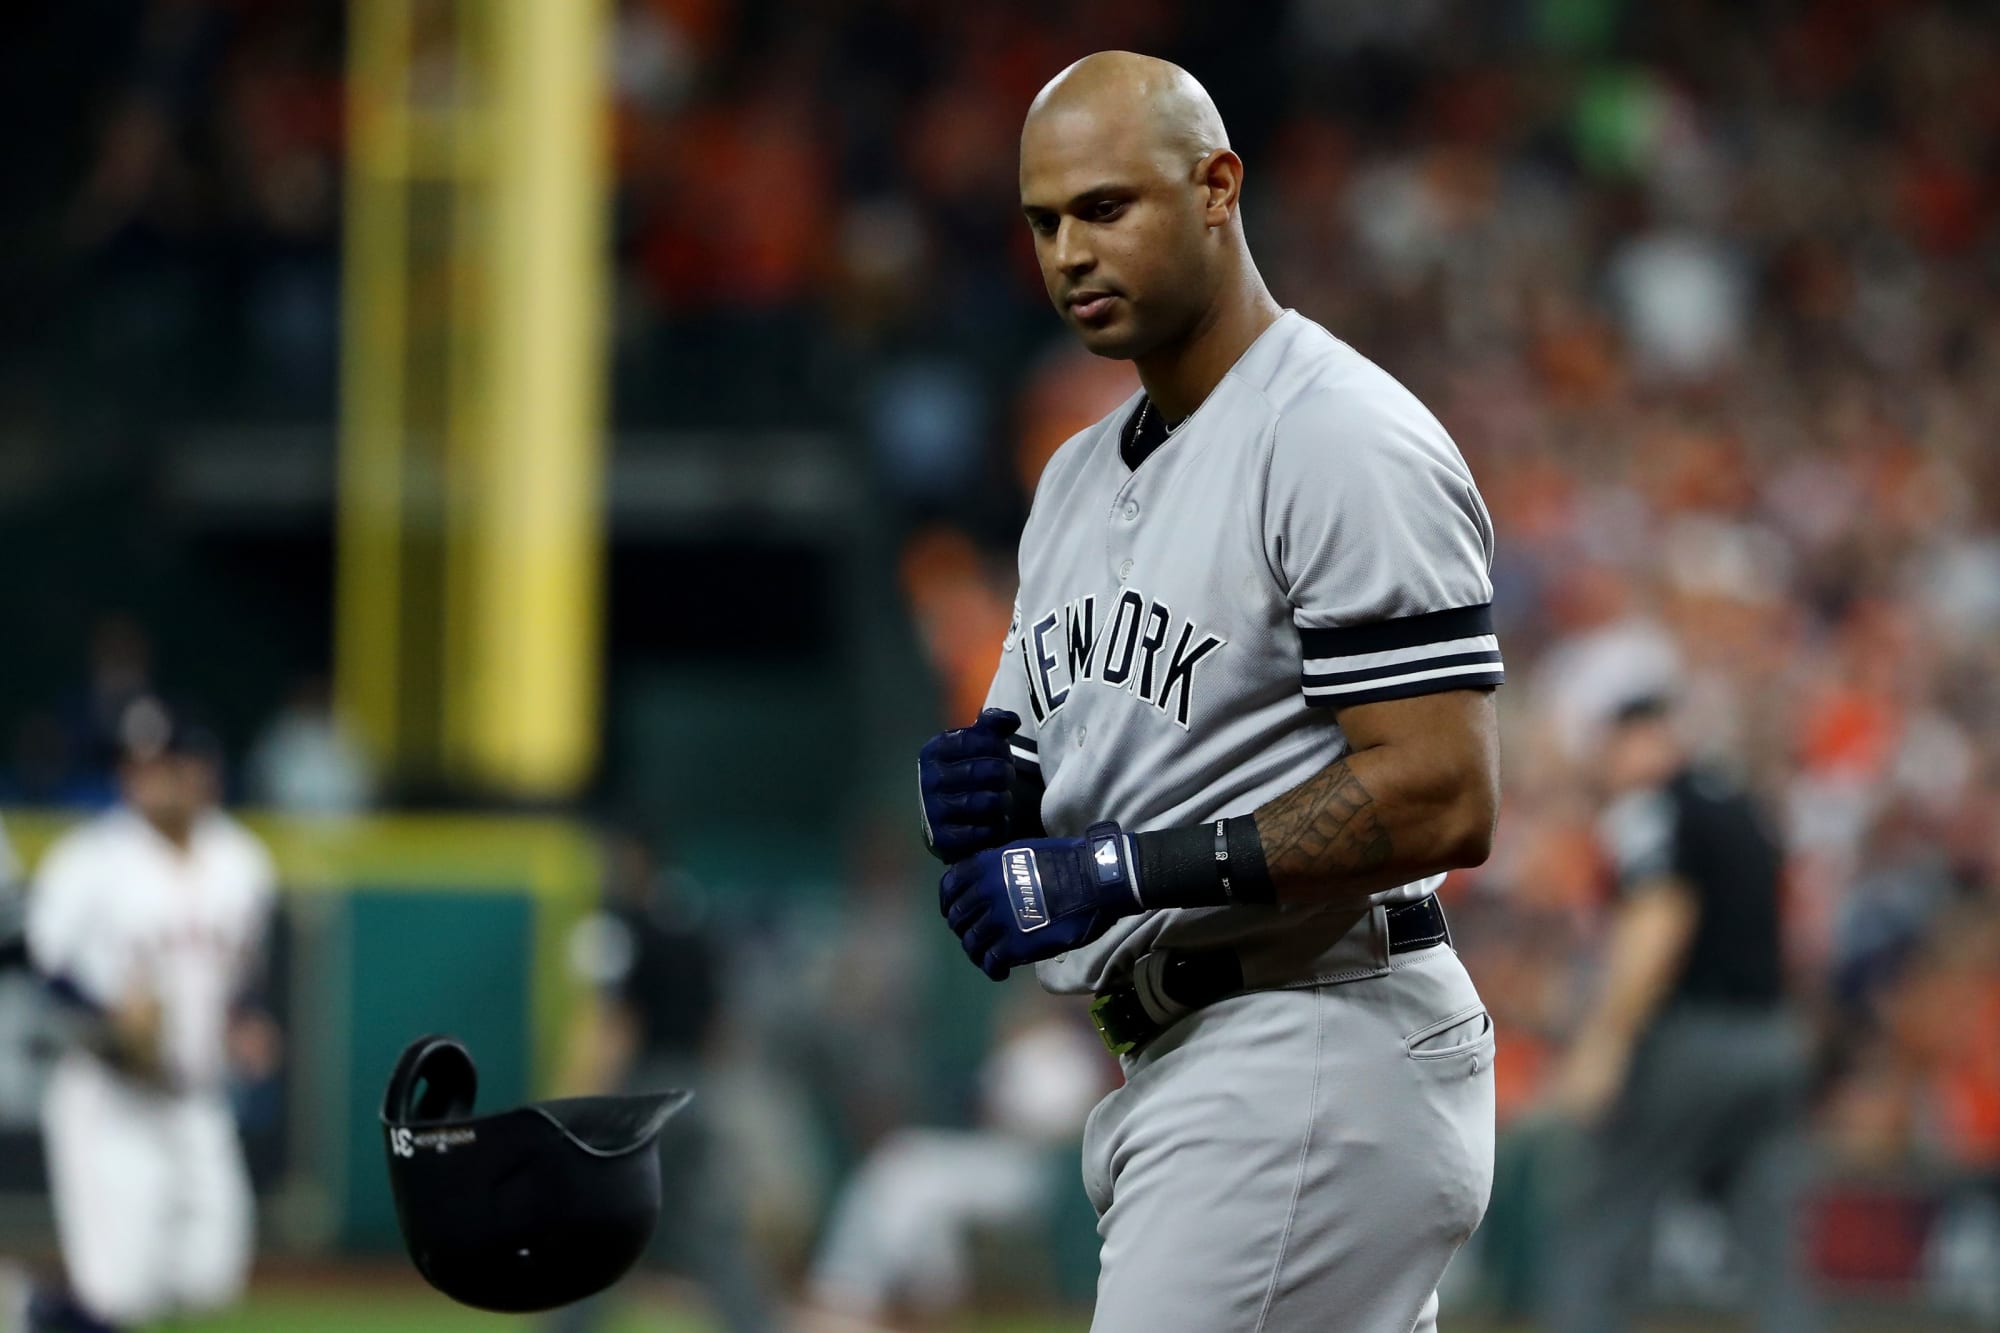 Yankees It's time to drop Aaron Hicks in the batting order